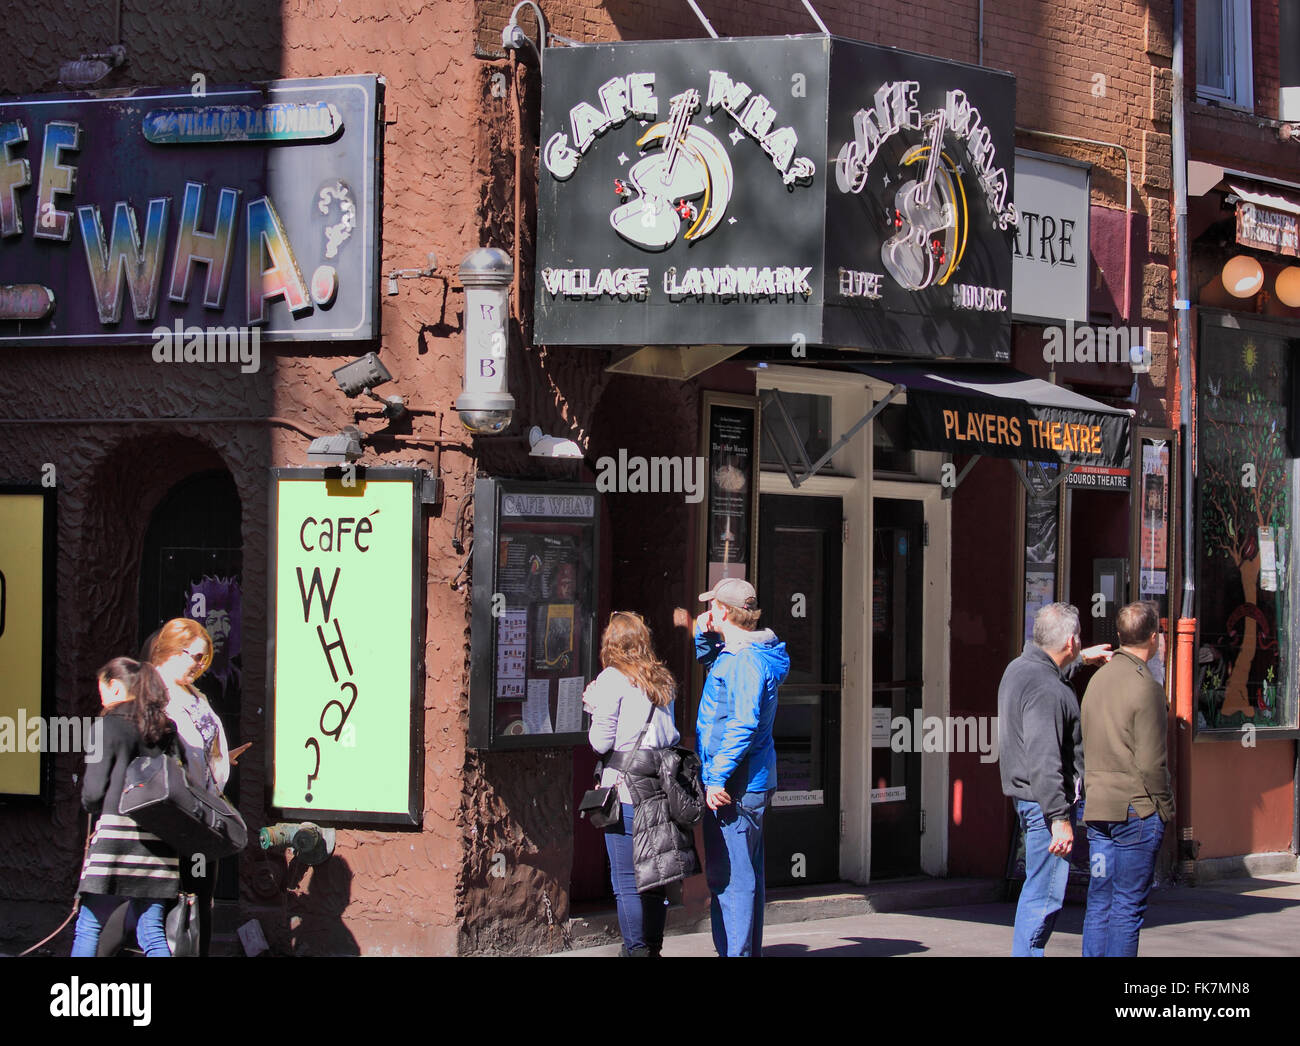 Cafe Wha cafe and music house Greenwich Village New York City Stock Photo